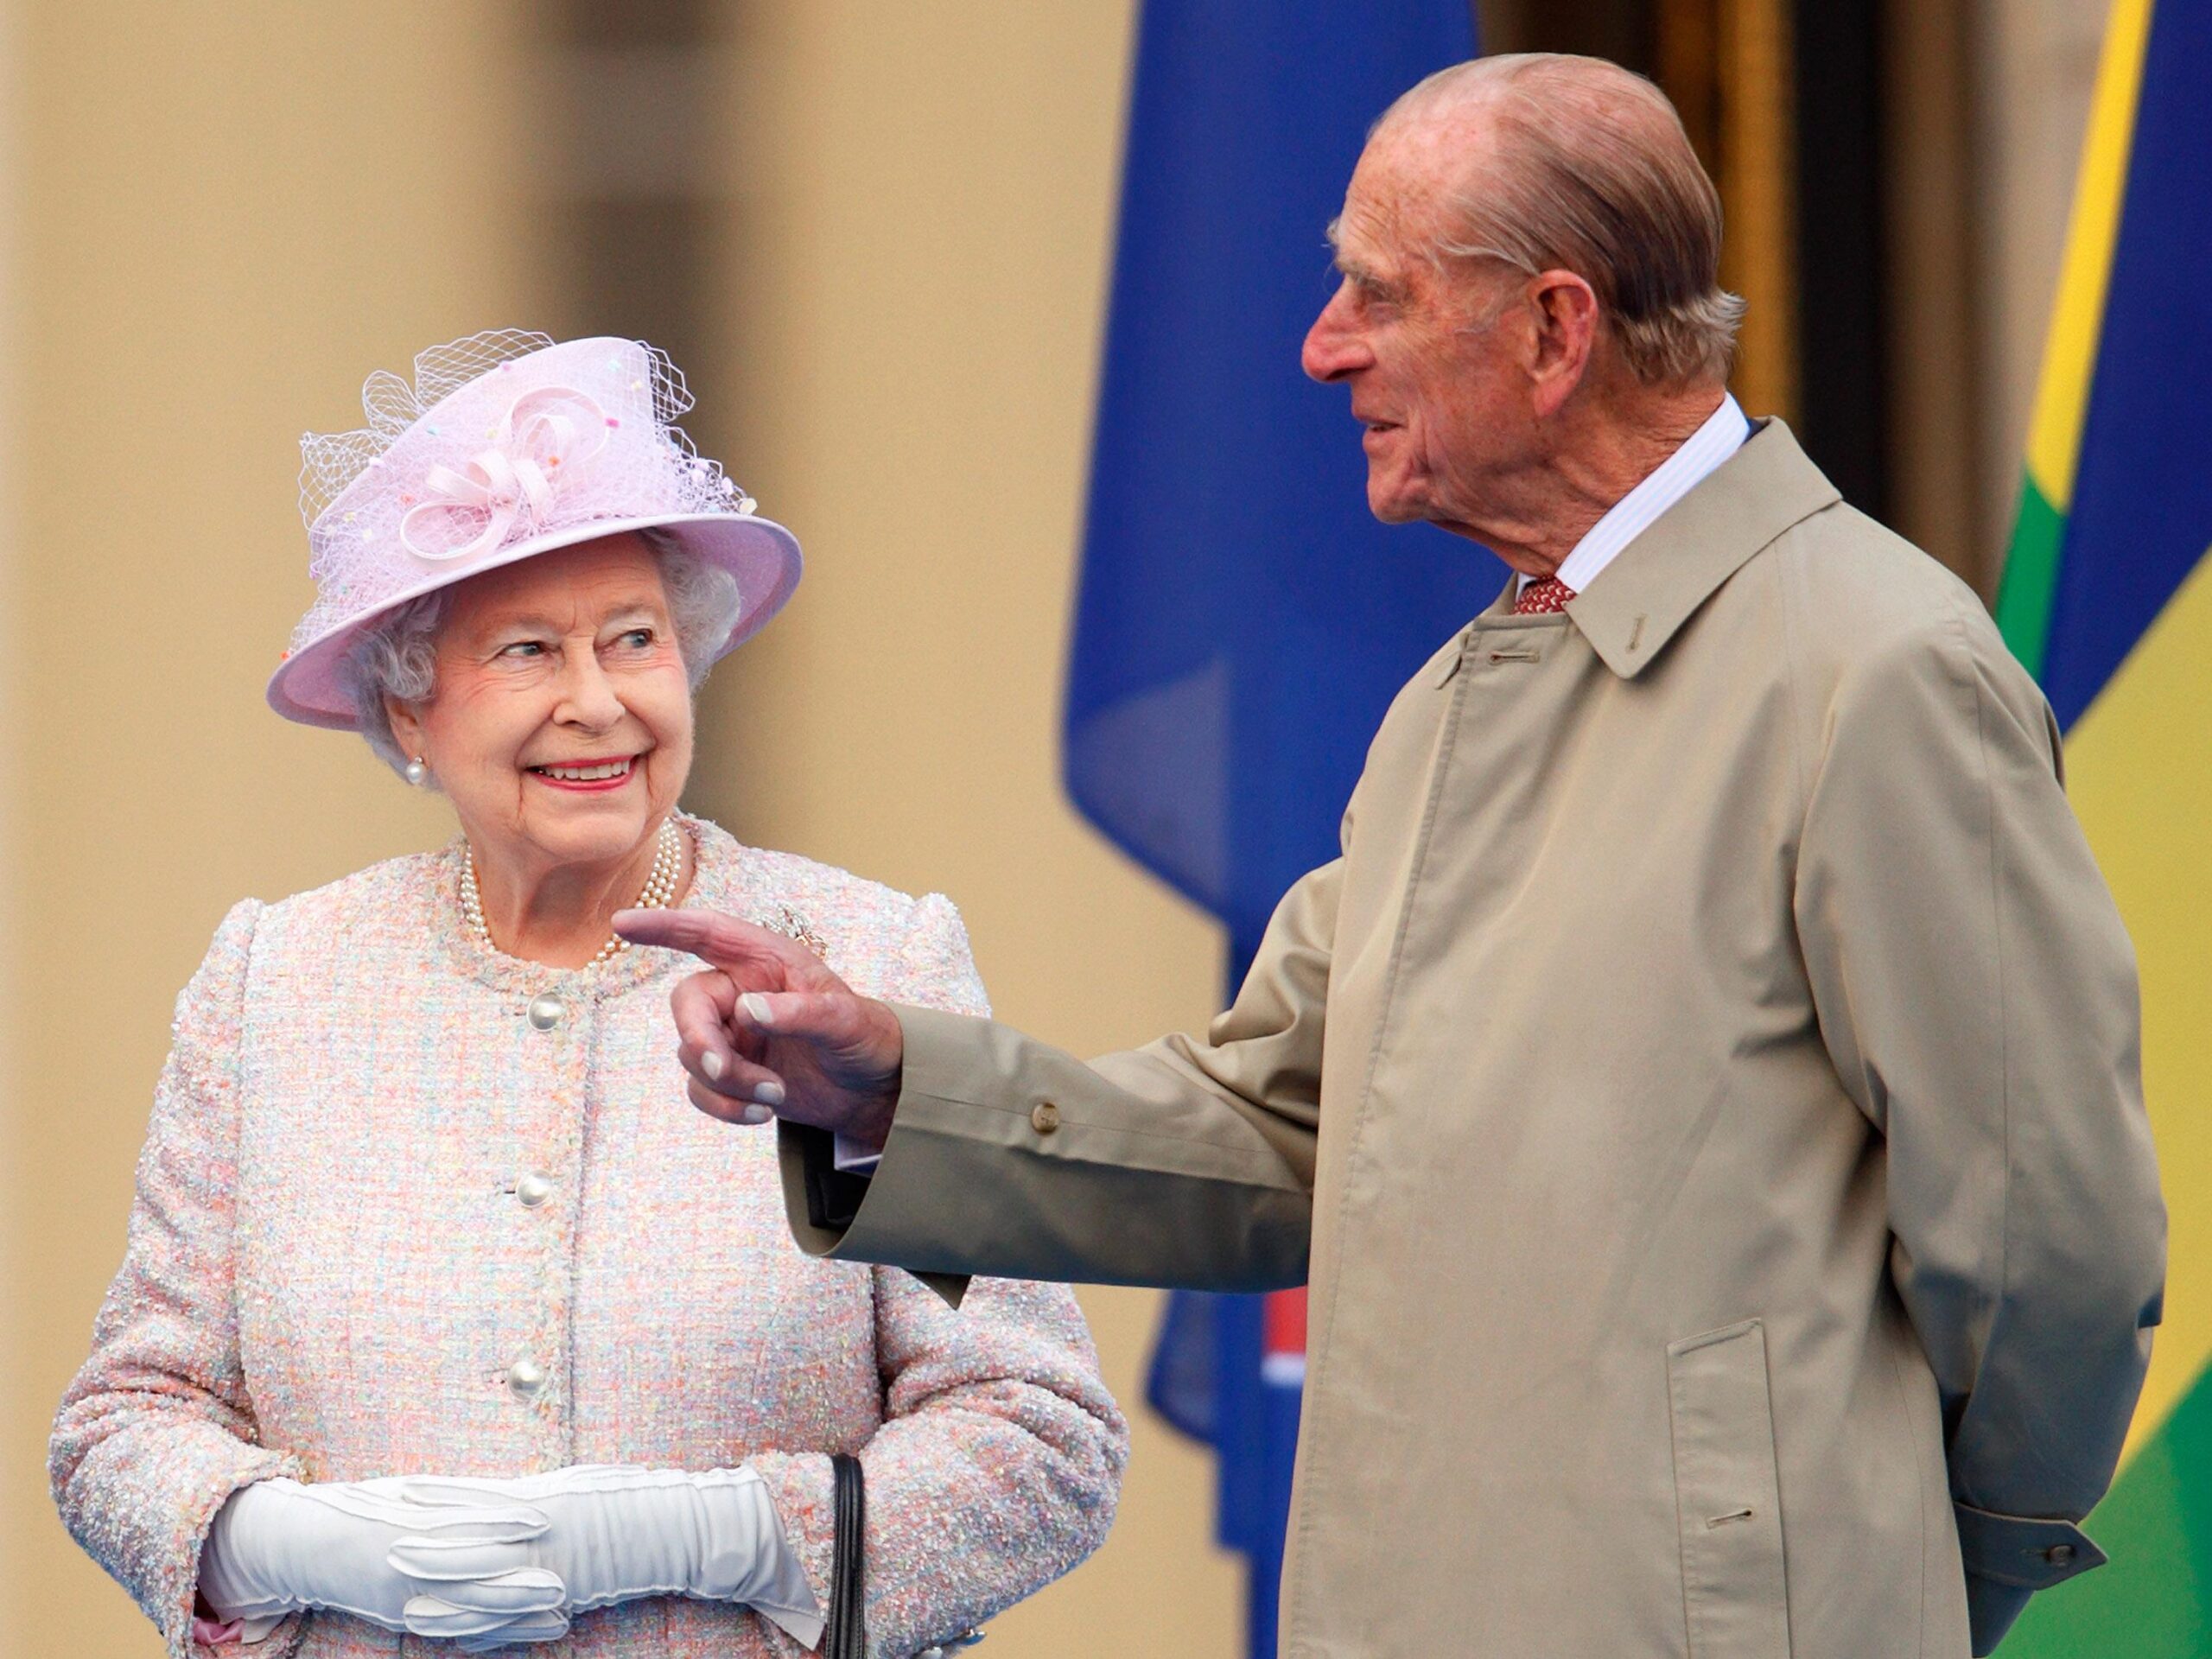 Prince Philip to retire from official duties